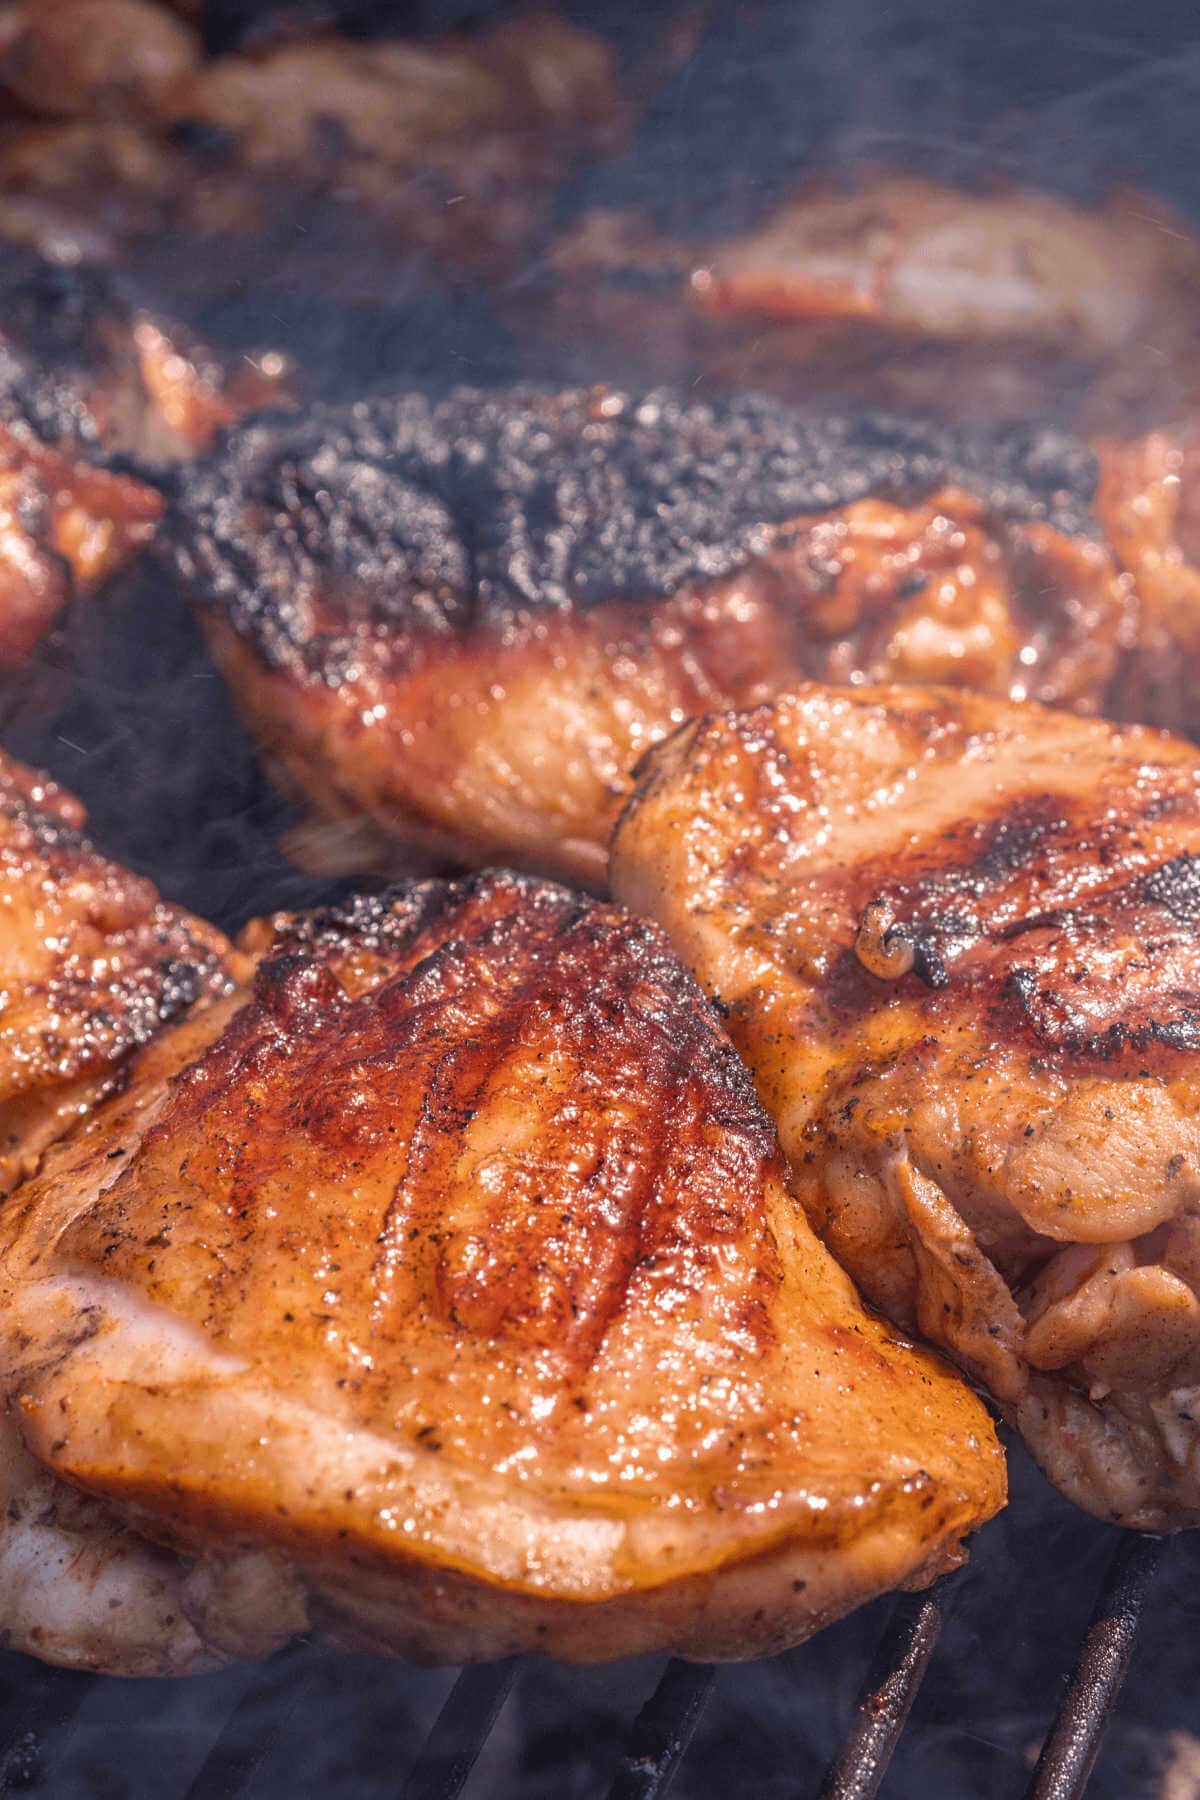 Marinated chicken thighs on grill.